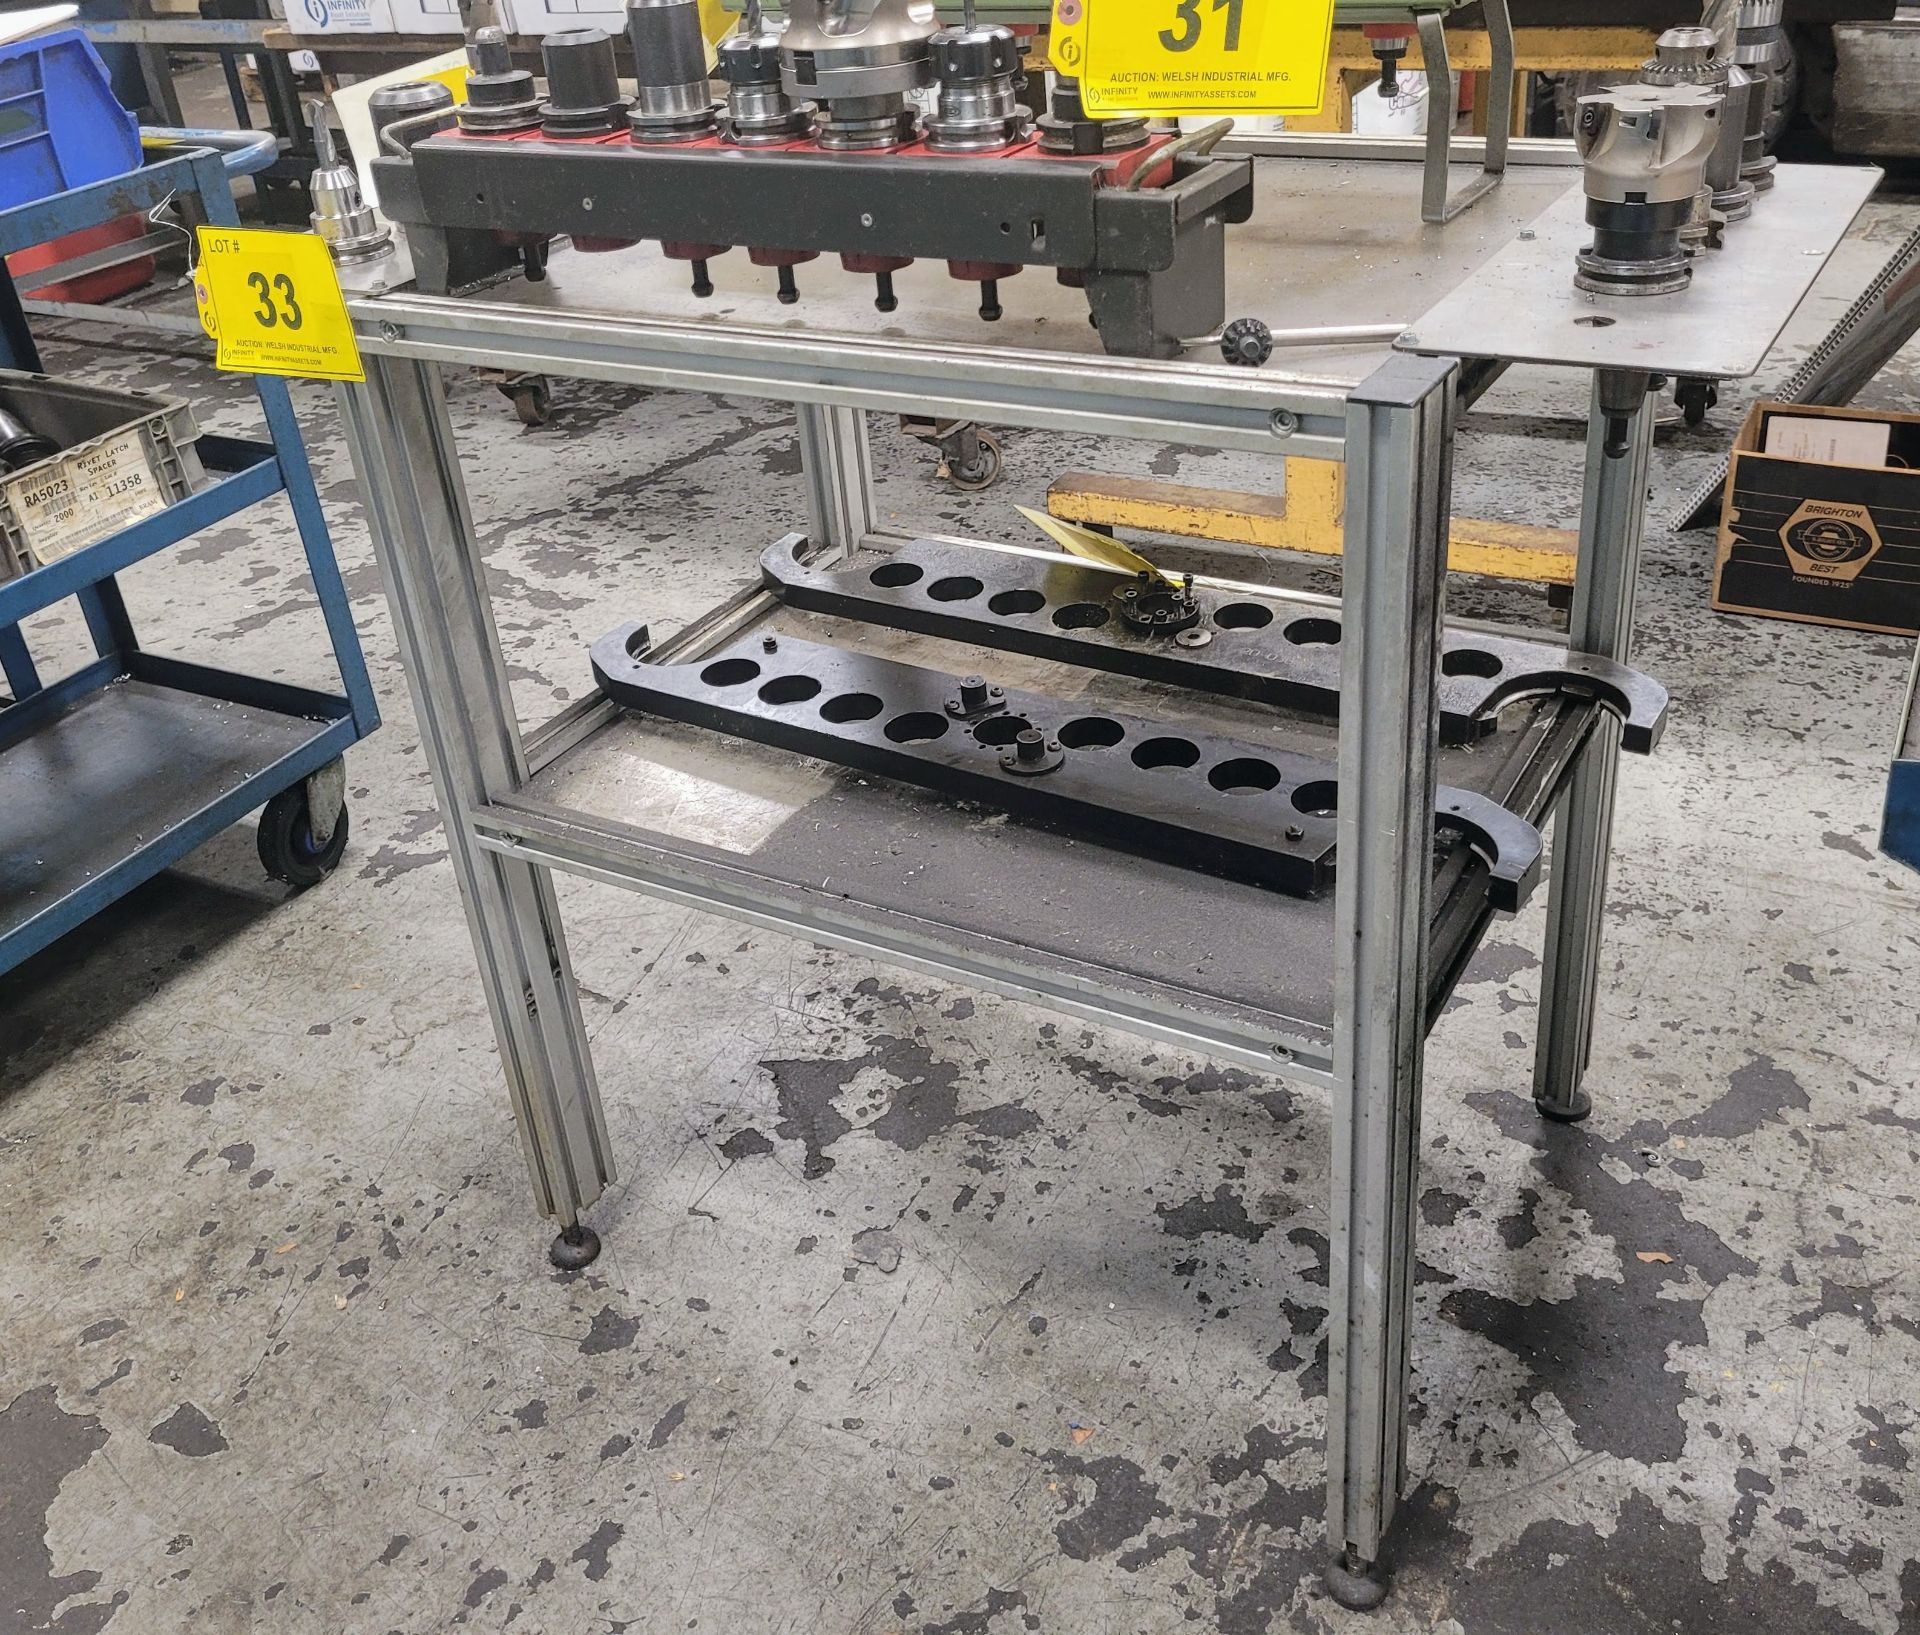 2-LEVEL TOOL HOLDER TABLE W/ 8-SLOTS (NO CONTENTS) - Image 2 of 2